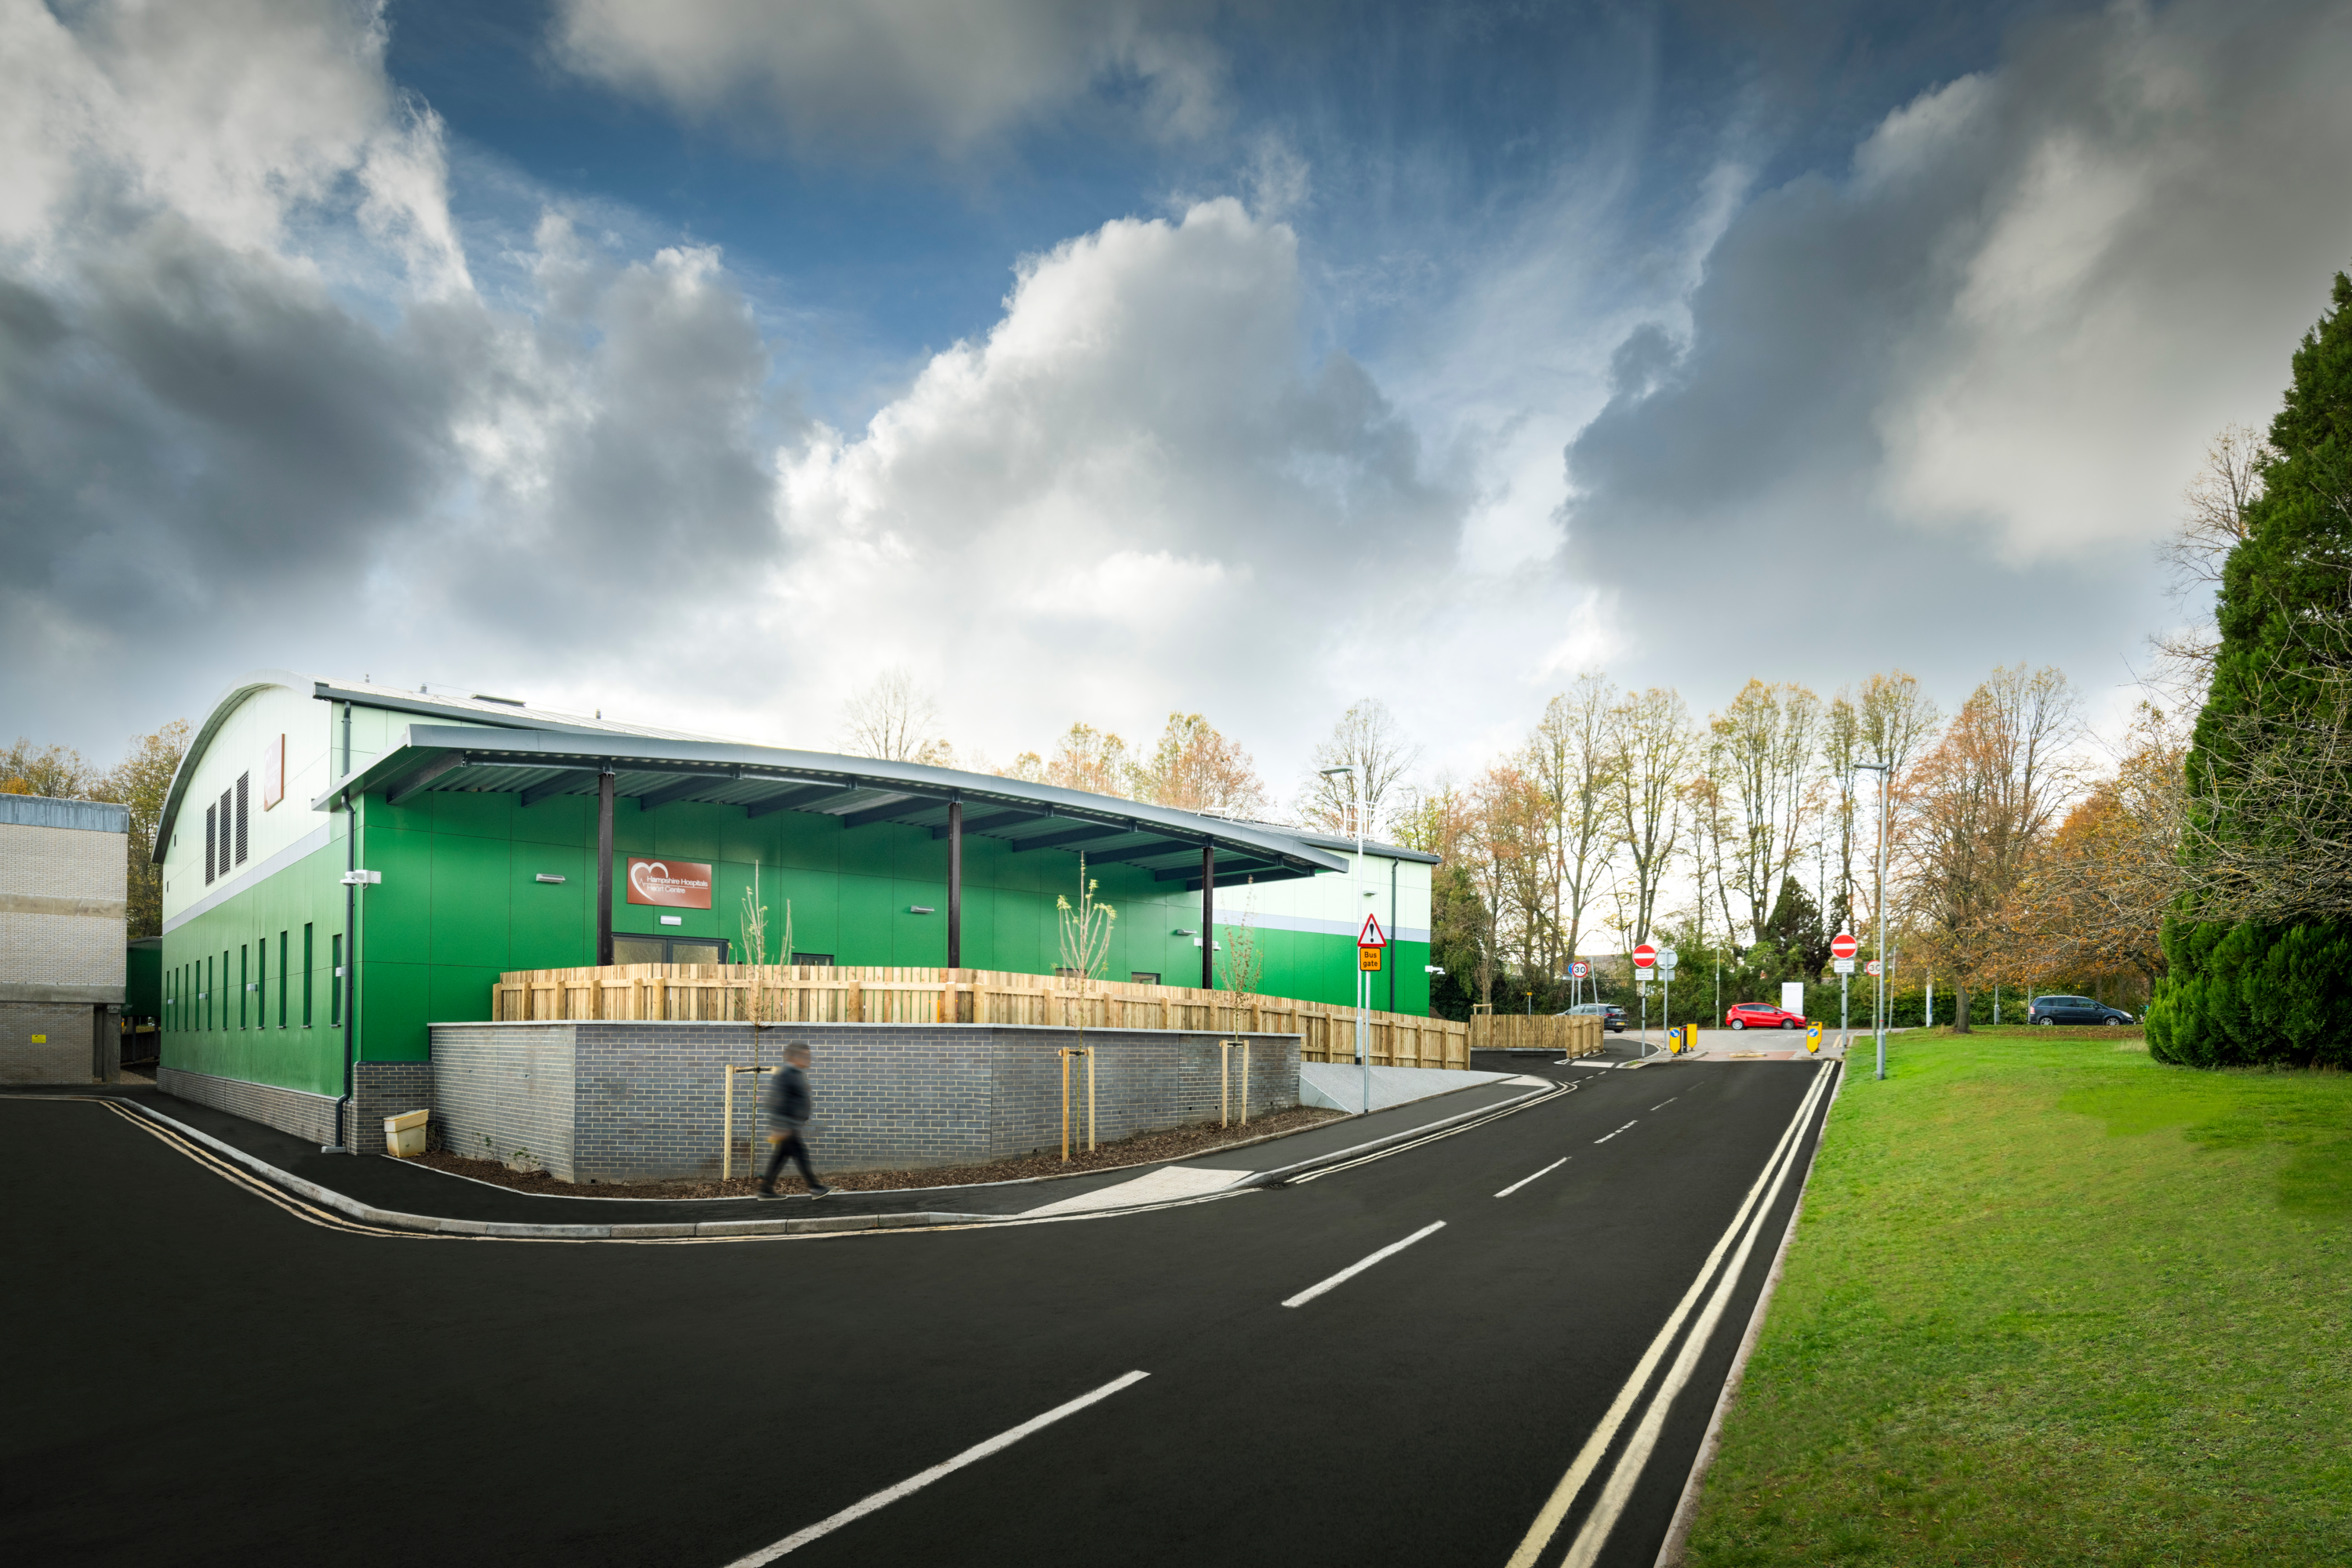 Photograph of the cardiac catheterisation laboratory at Basingstoke, with a barrel vaulted roof and green external cladding.